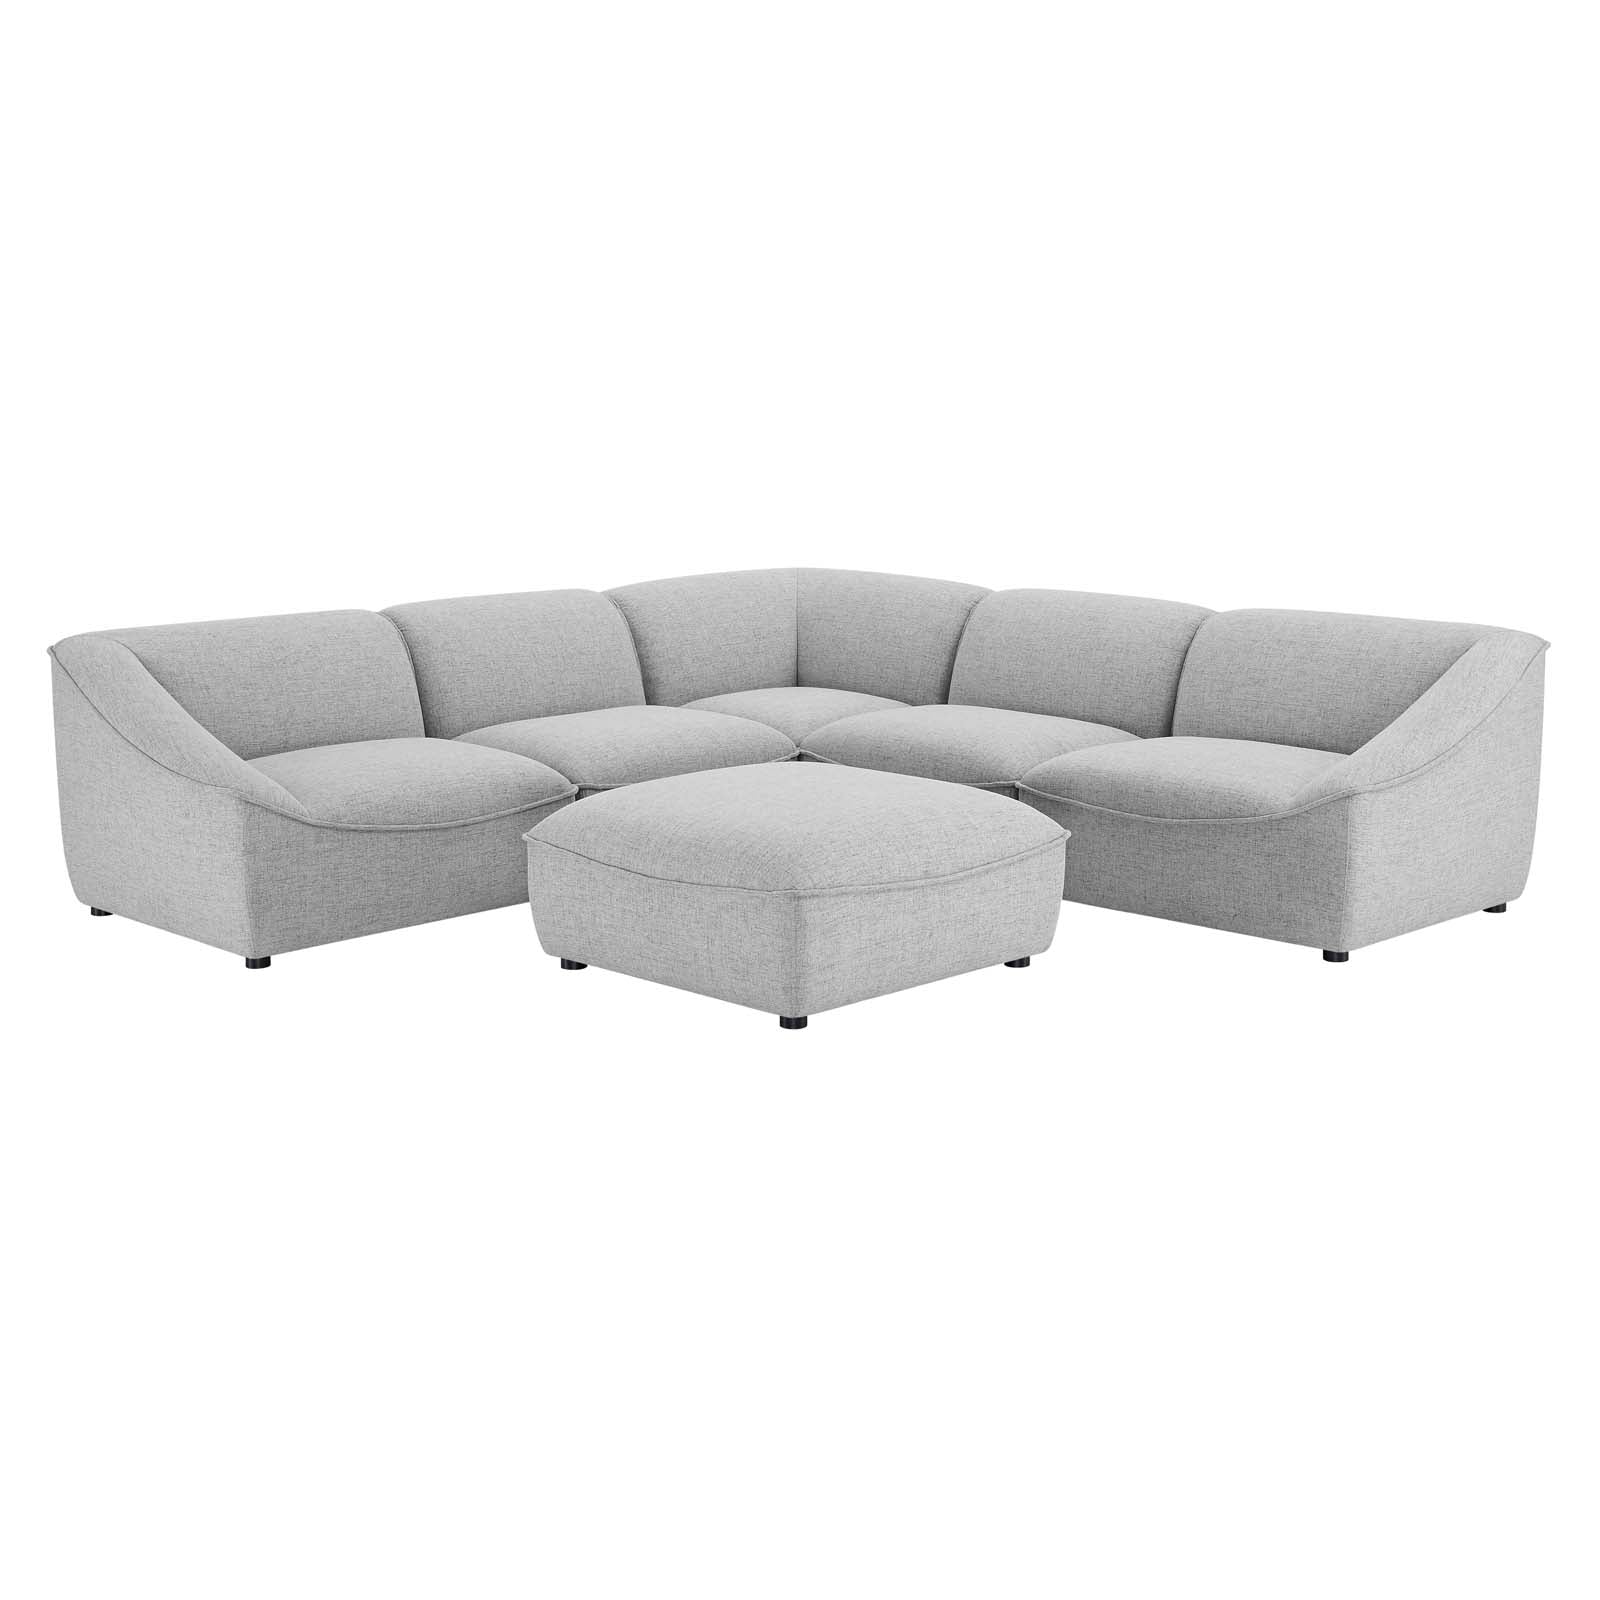 Modway Sectional Sofas - Comprise-6-Piece-Sectional-Sofa-Light-Gray